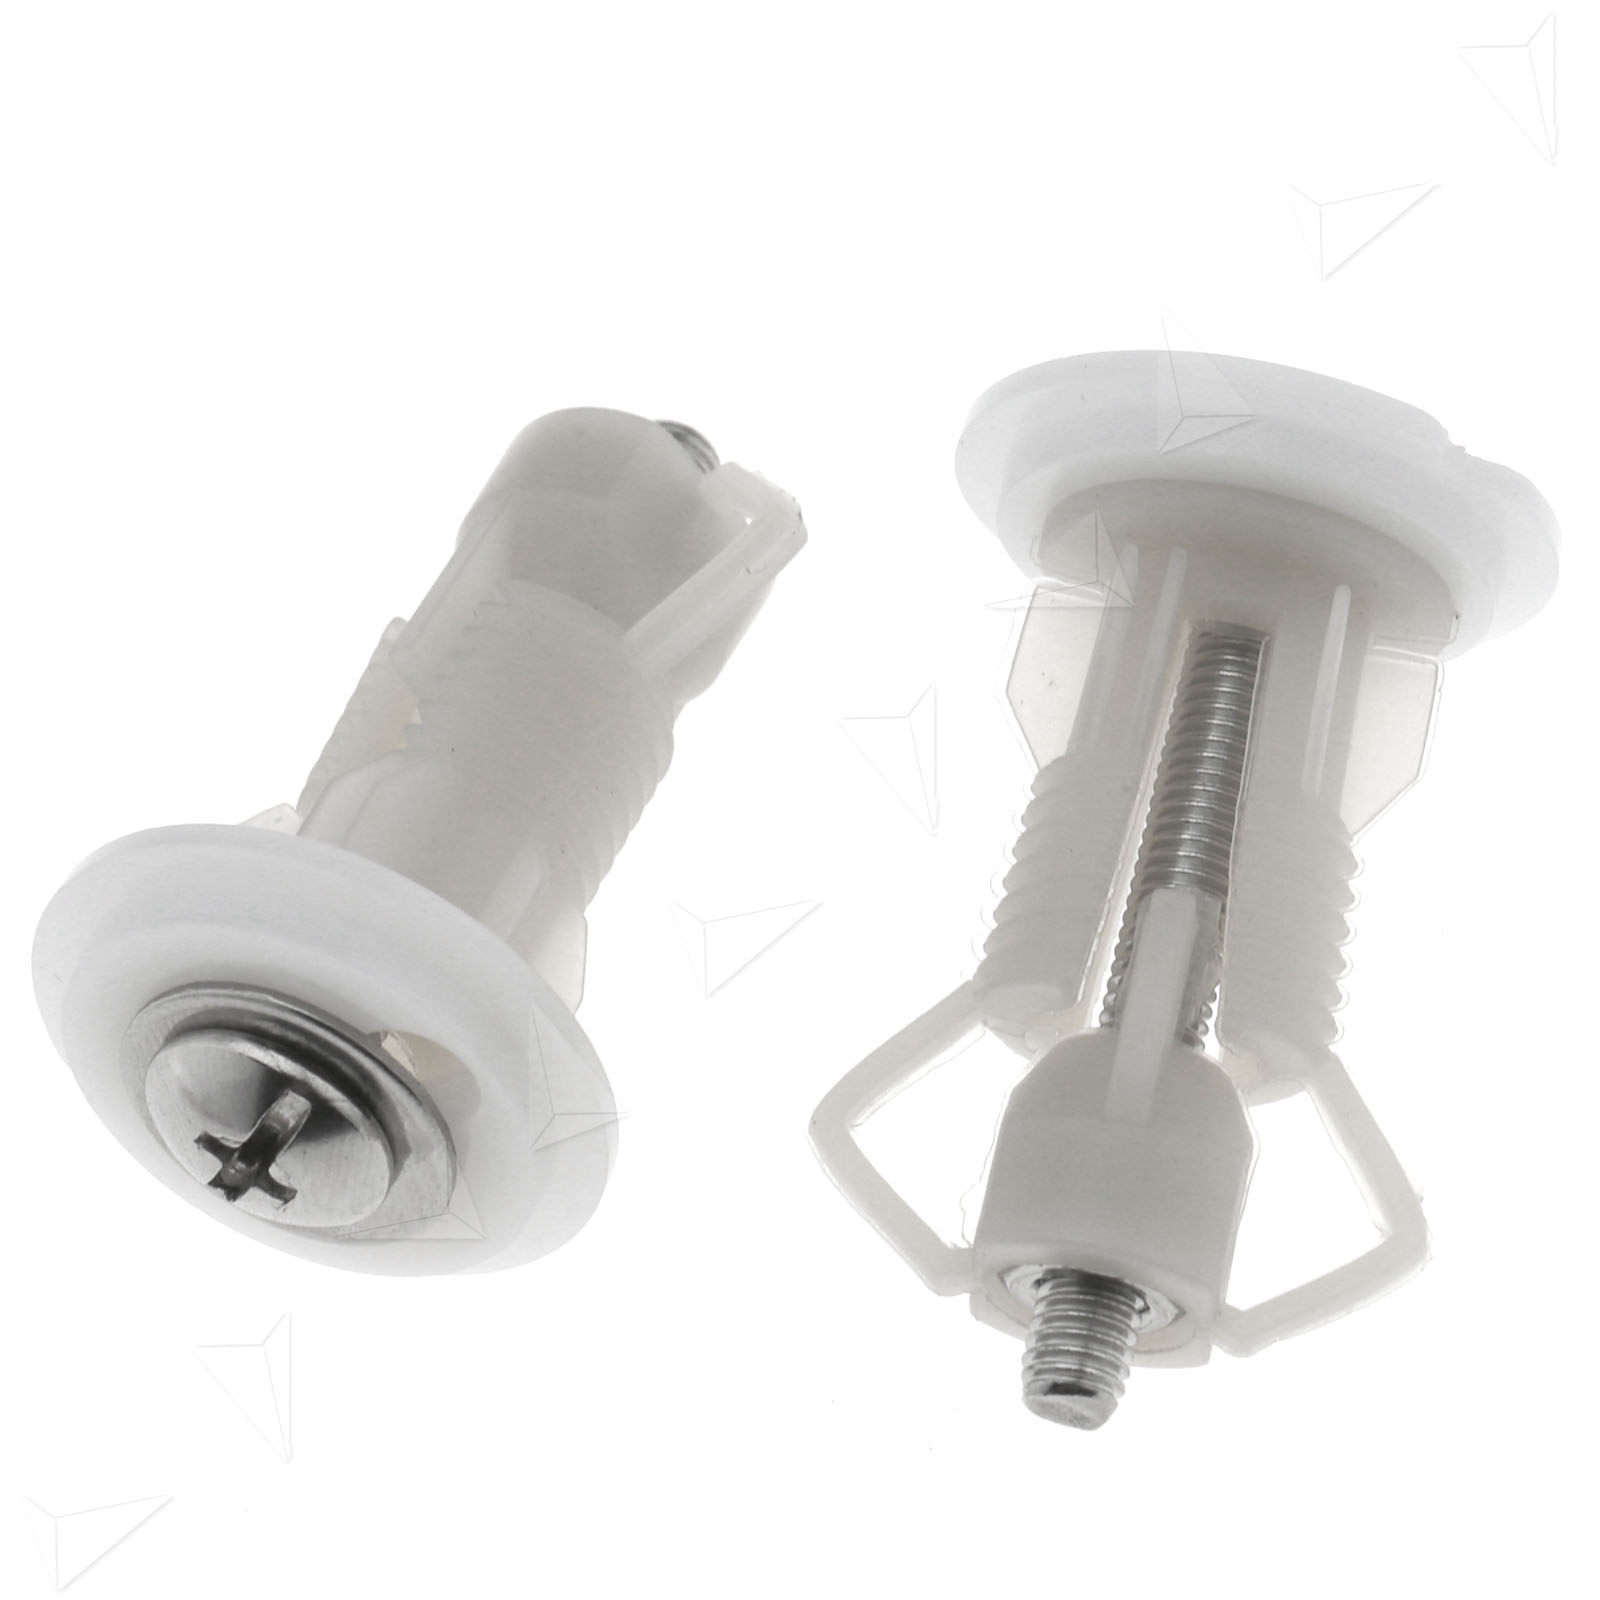 Toilet Seats Wc Blind Hole Fitting Toilet Top Cover Lid Seat Fixings Nut Screw Back to Wall